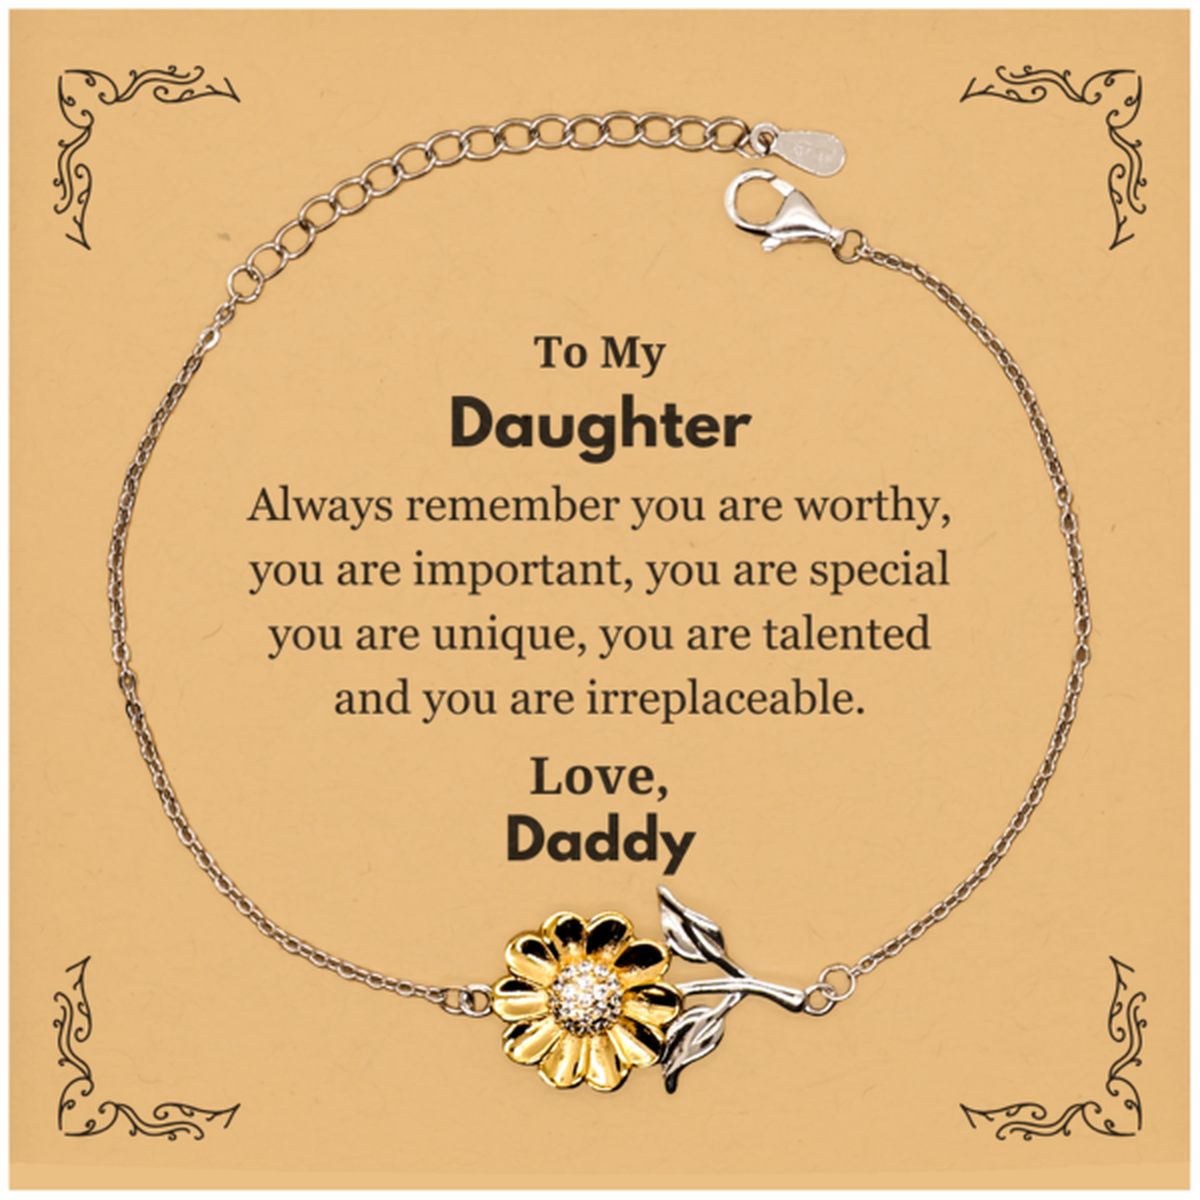 Daughter Birthday Gifts from Daddy, Inspirational Sunflower Bracelet for Daughter Christmas Graduation Gifts for Daughter Always remember you are worthy, you are important. Love, Daddy